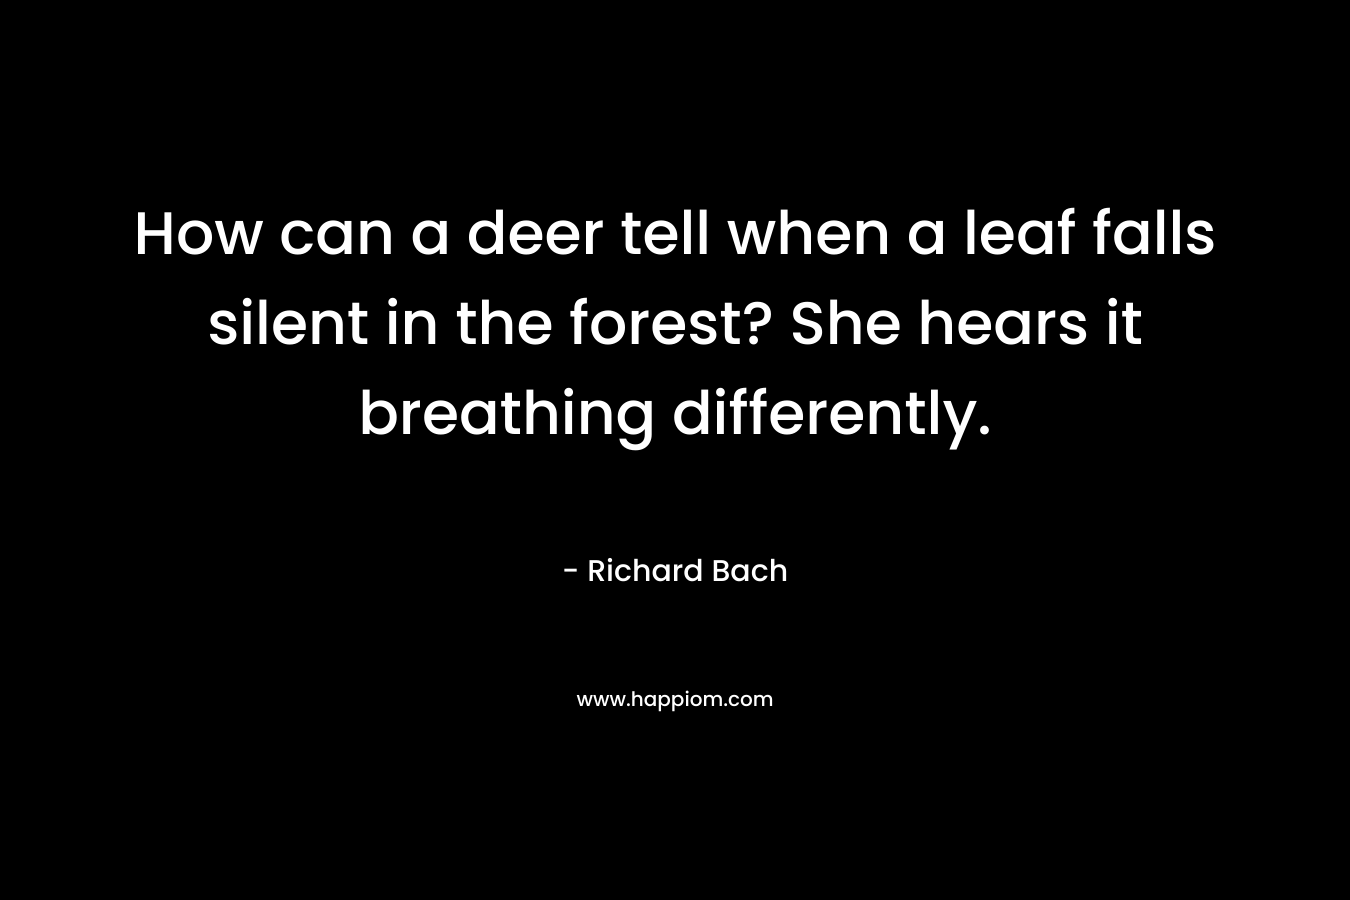 How can a deer tell when a leaf falls silent in the forest? She hears it breathing differently.